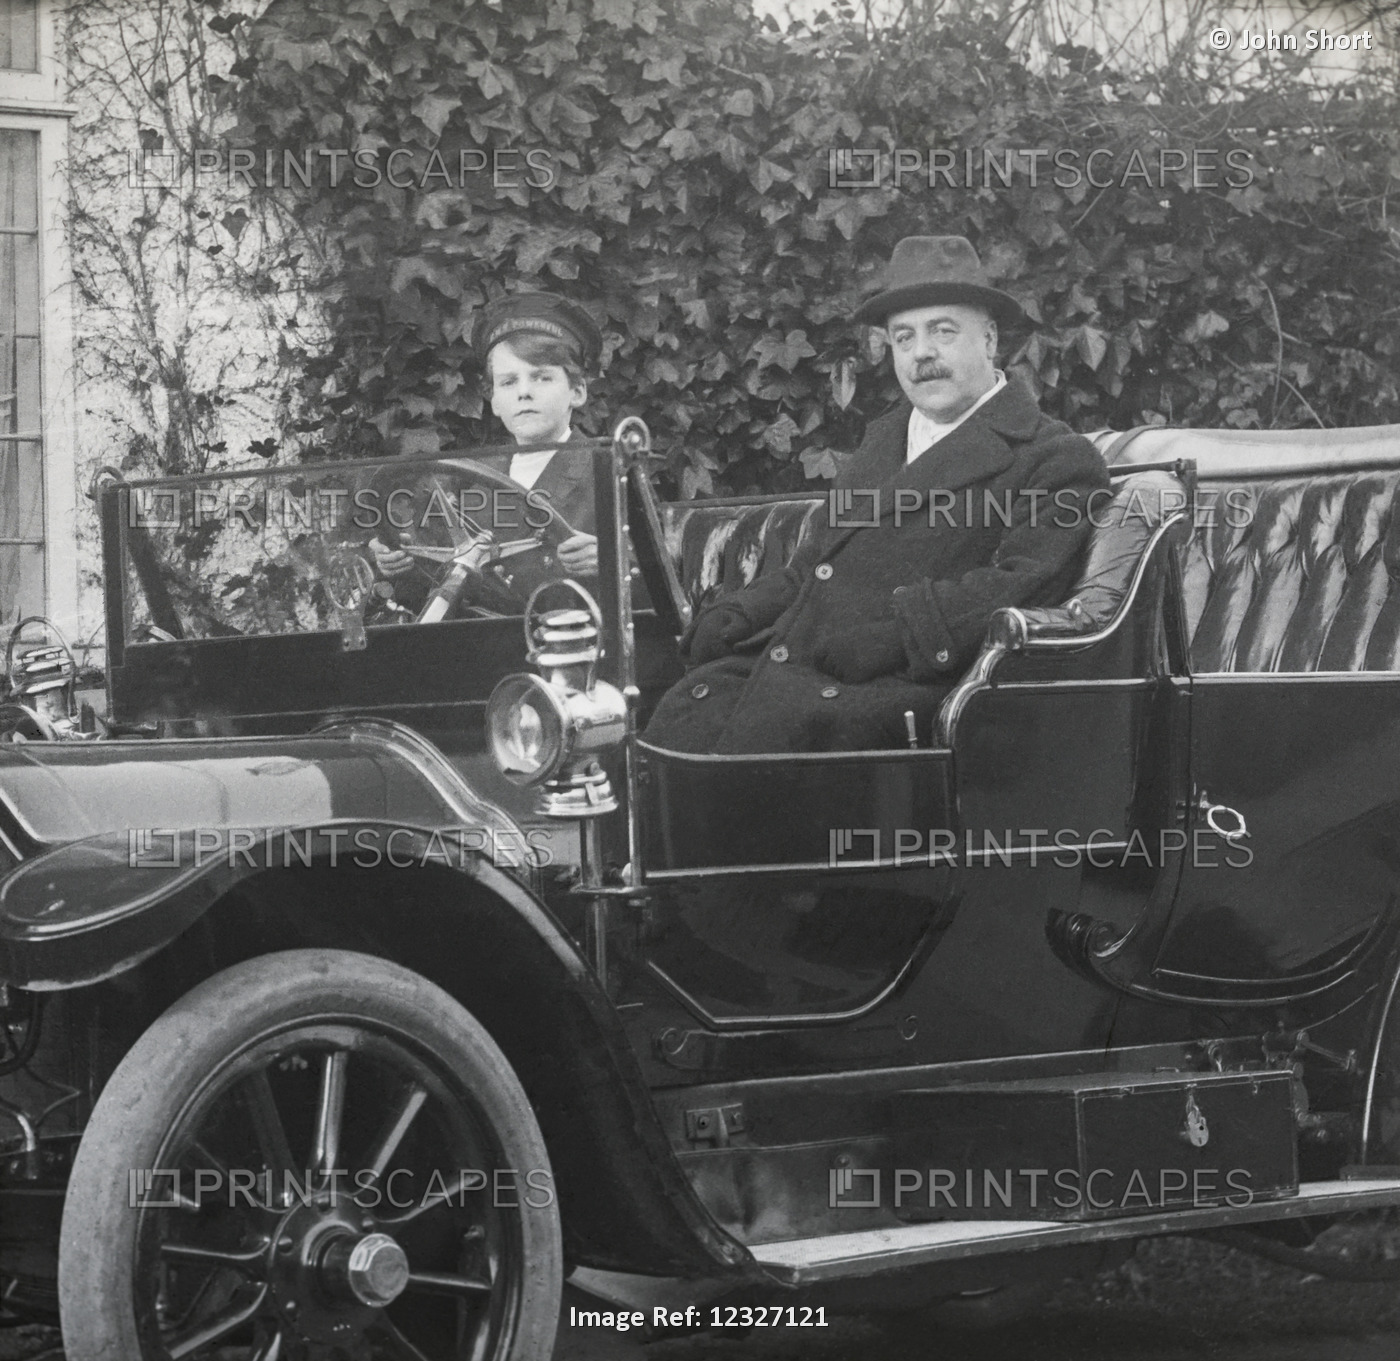 Man And Boy In Vintage Car From Magic Lantern Slide Cica 1900